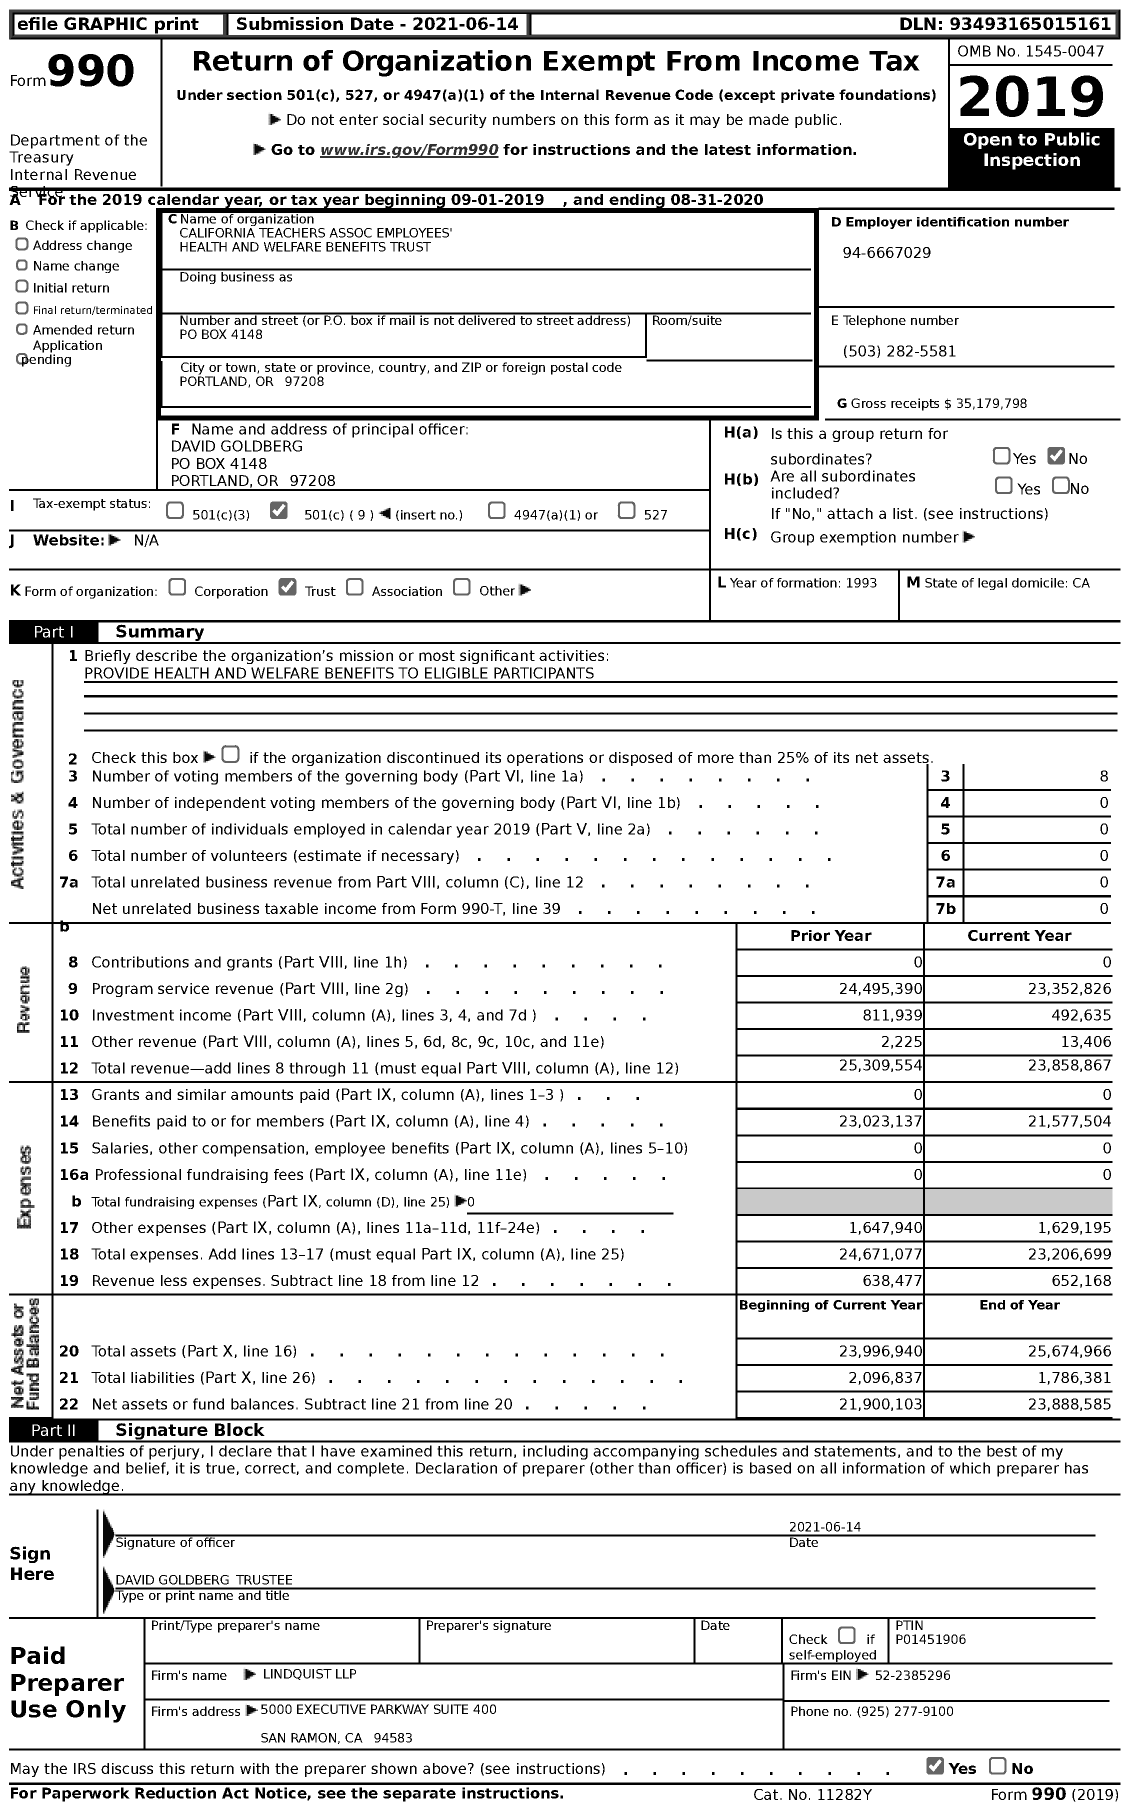 Image of first page of 2019 Form 990 for California Teachers Association Employees' Health and Welfare Benefits Trust